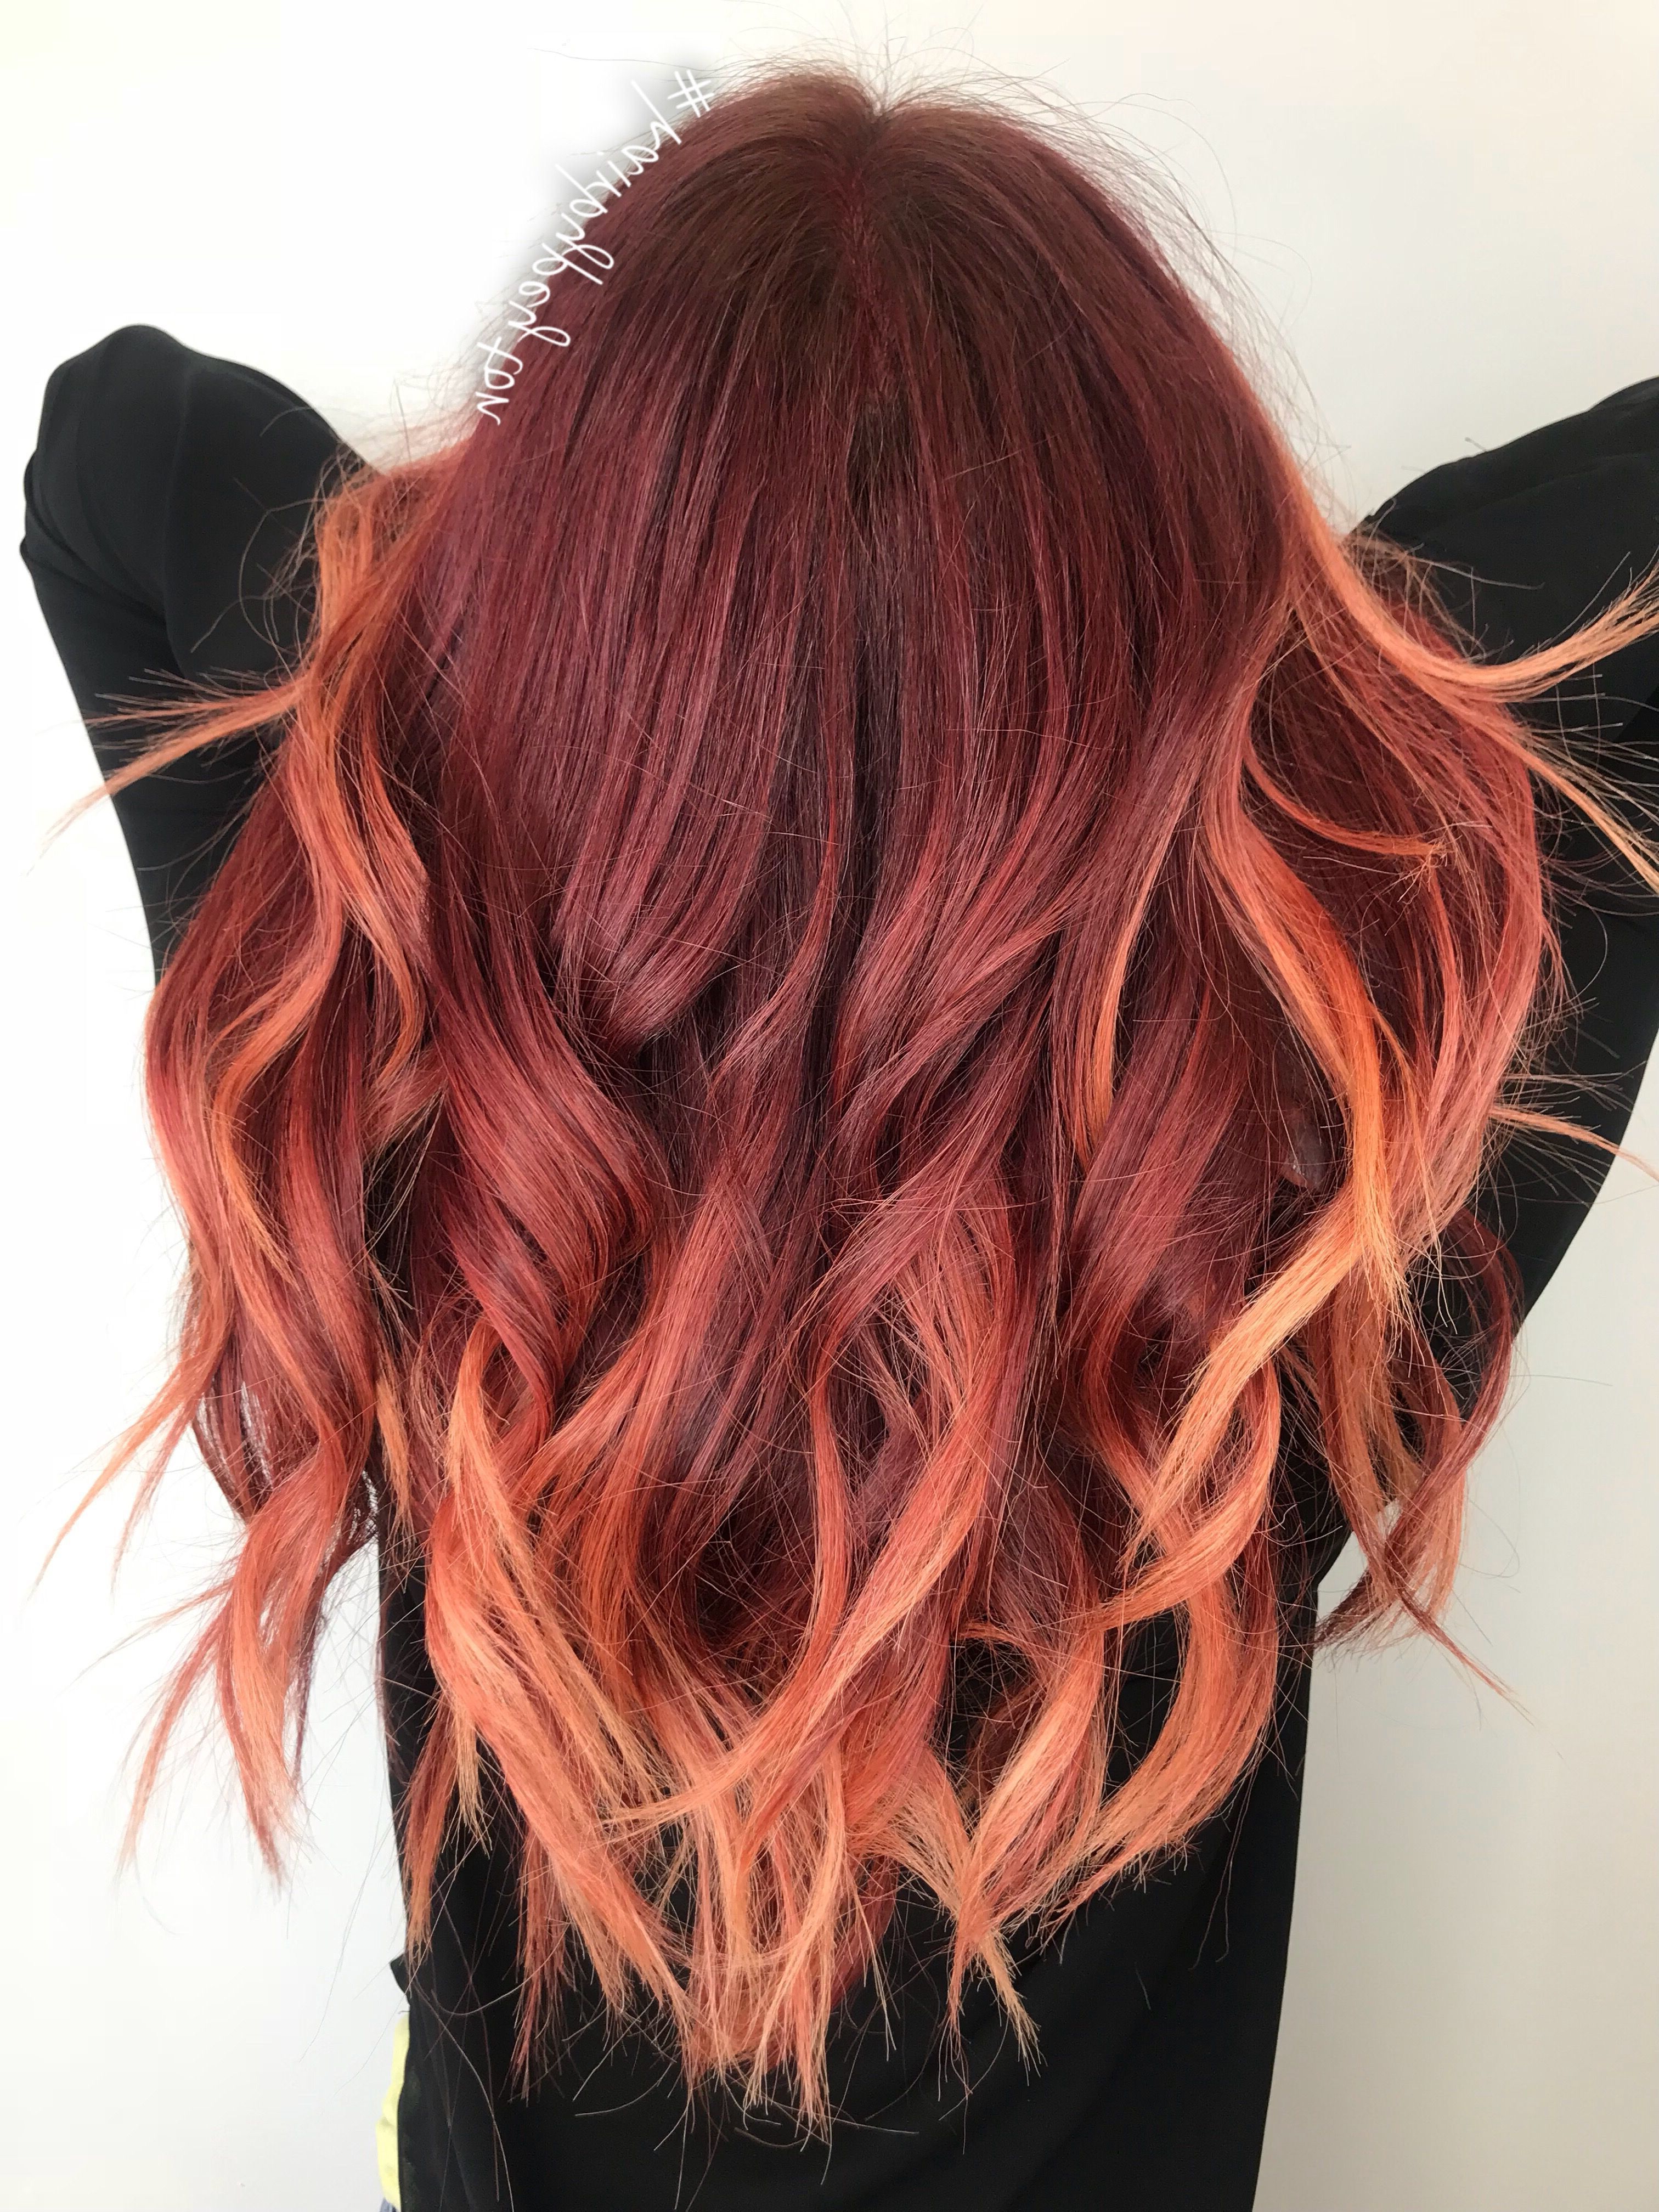 Sunburst Red To Copper Hair Balayage | Hairme In 2018 Intended For Burgundy And Tangerine Piecey Bob Hairstyles (View 18 of 20)